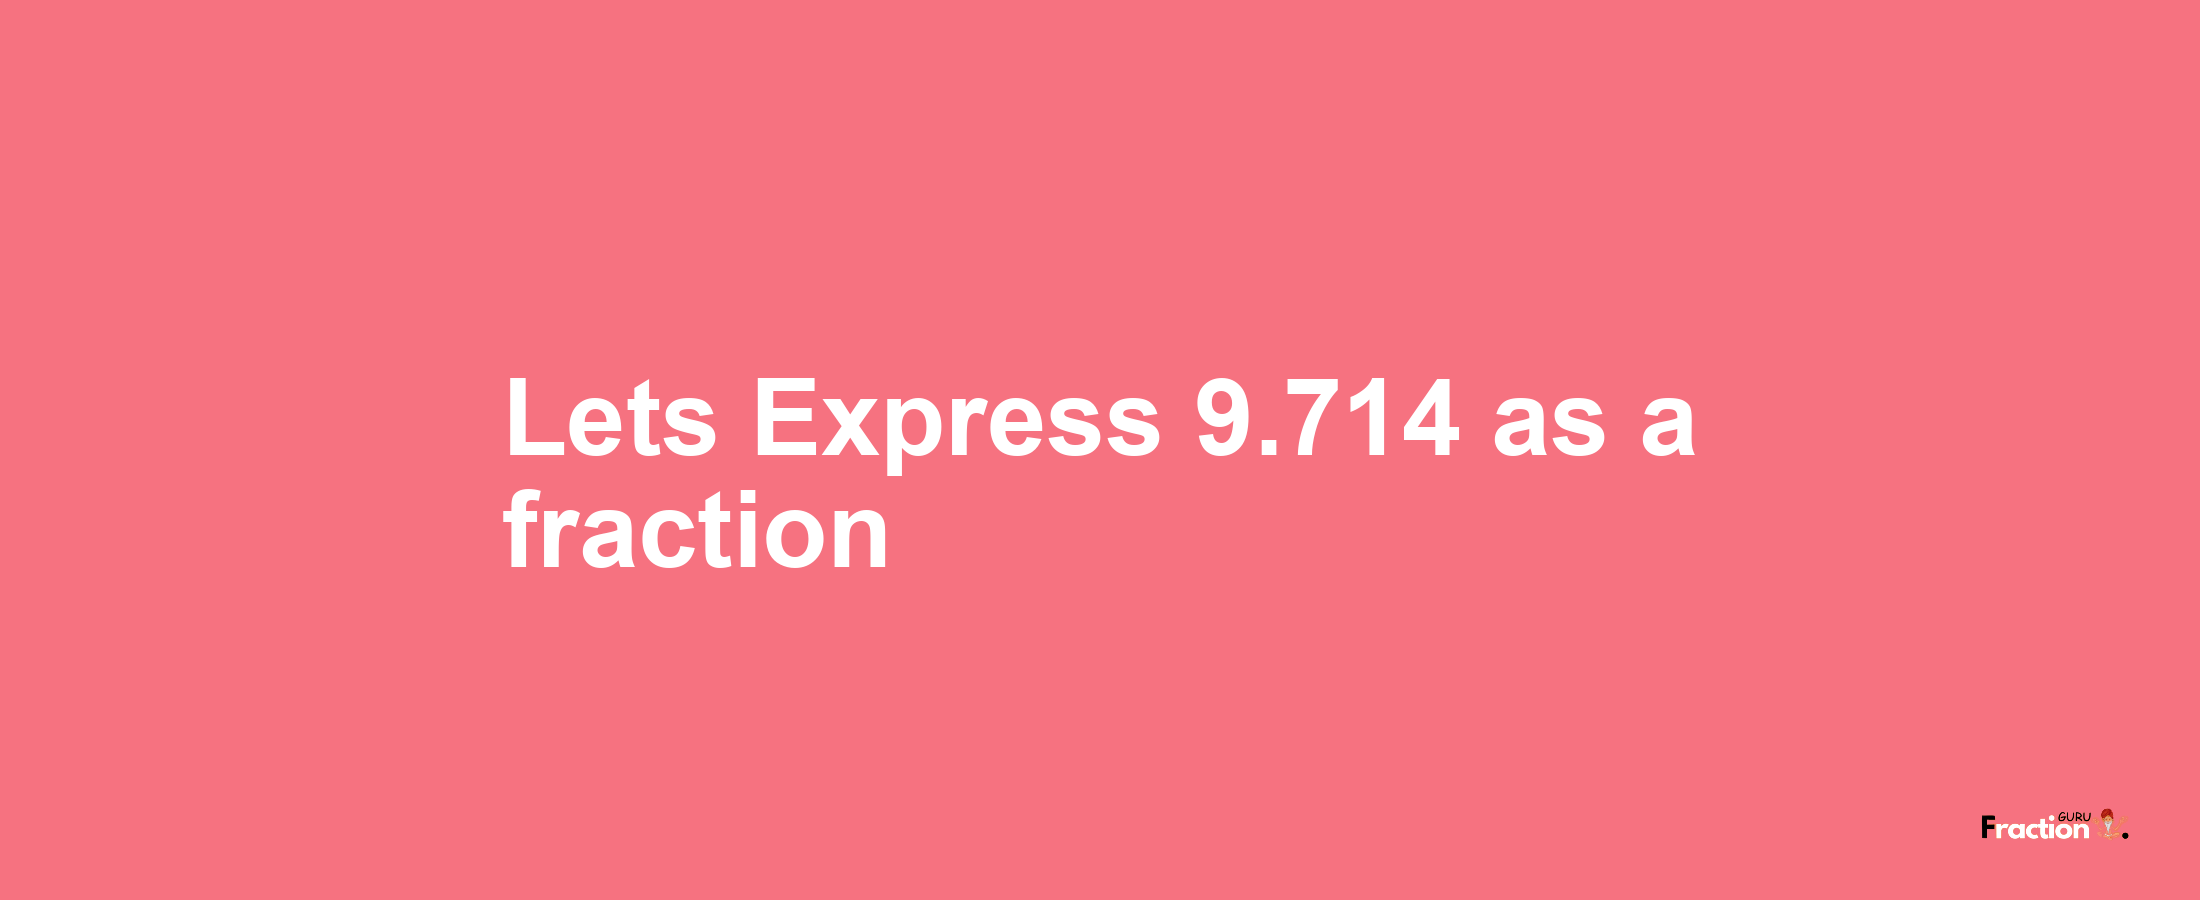 Lets Express 9.714 as afraction